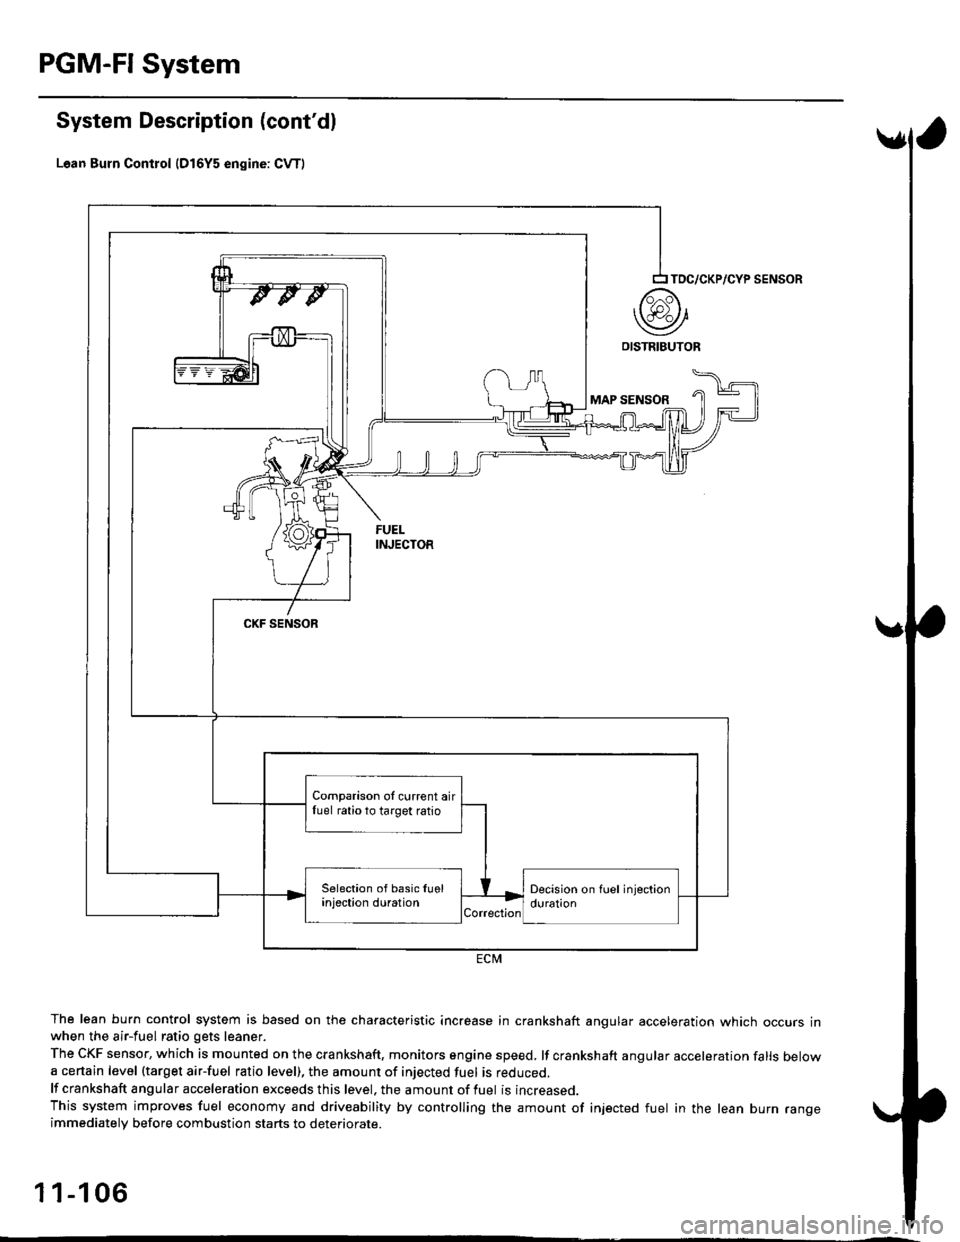 HONDA CIVIC 1996 6.G Repair Manual PGM-FI System
System Description (contdl
Lean Burn Control {D16Y5 engine: CvT)
The lean burn control system is based on the characteristic increase in crankshaft angular acceleration which occurs inw